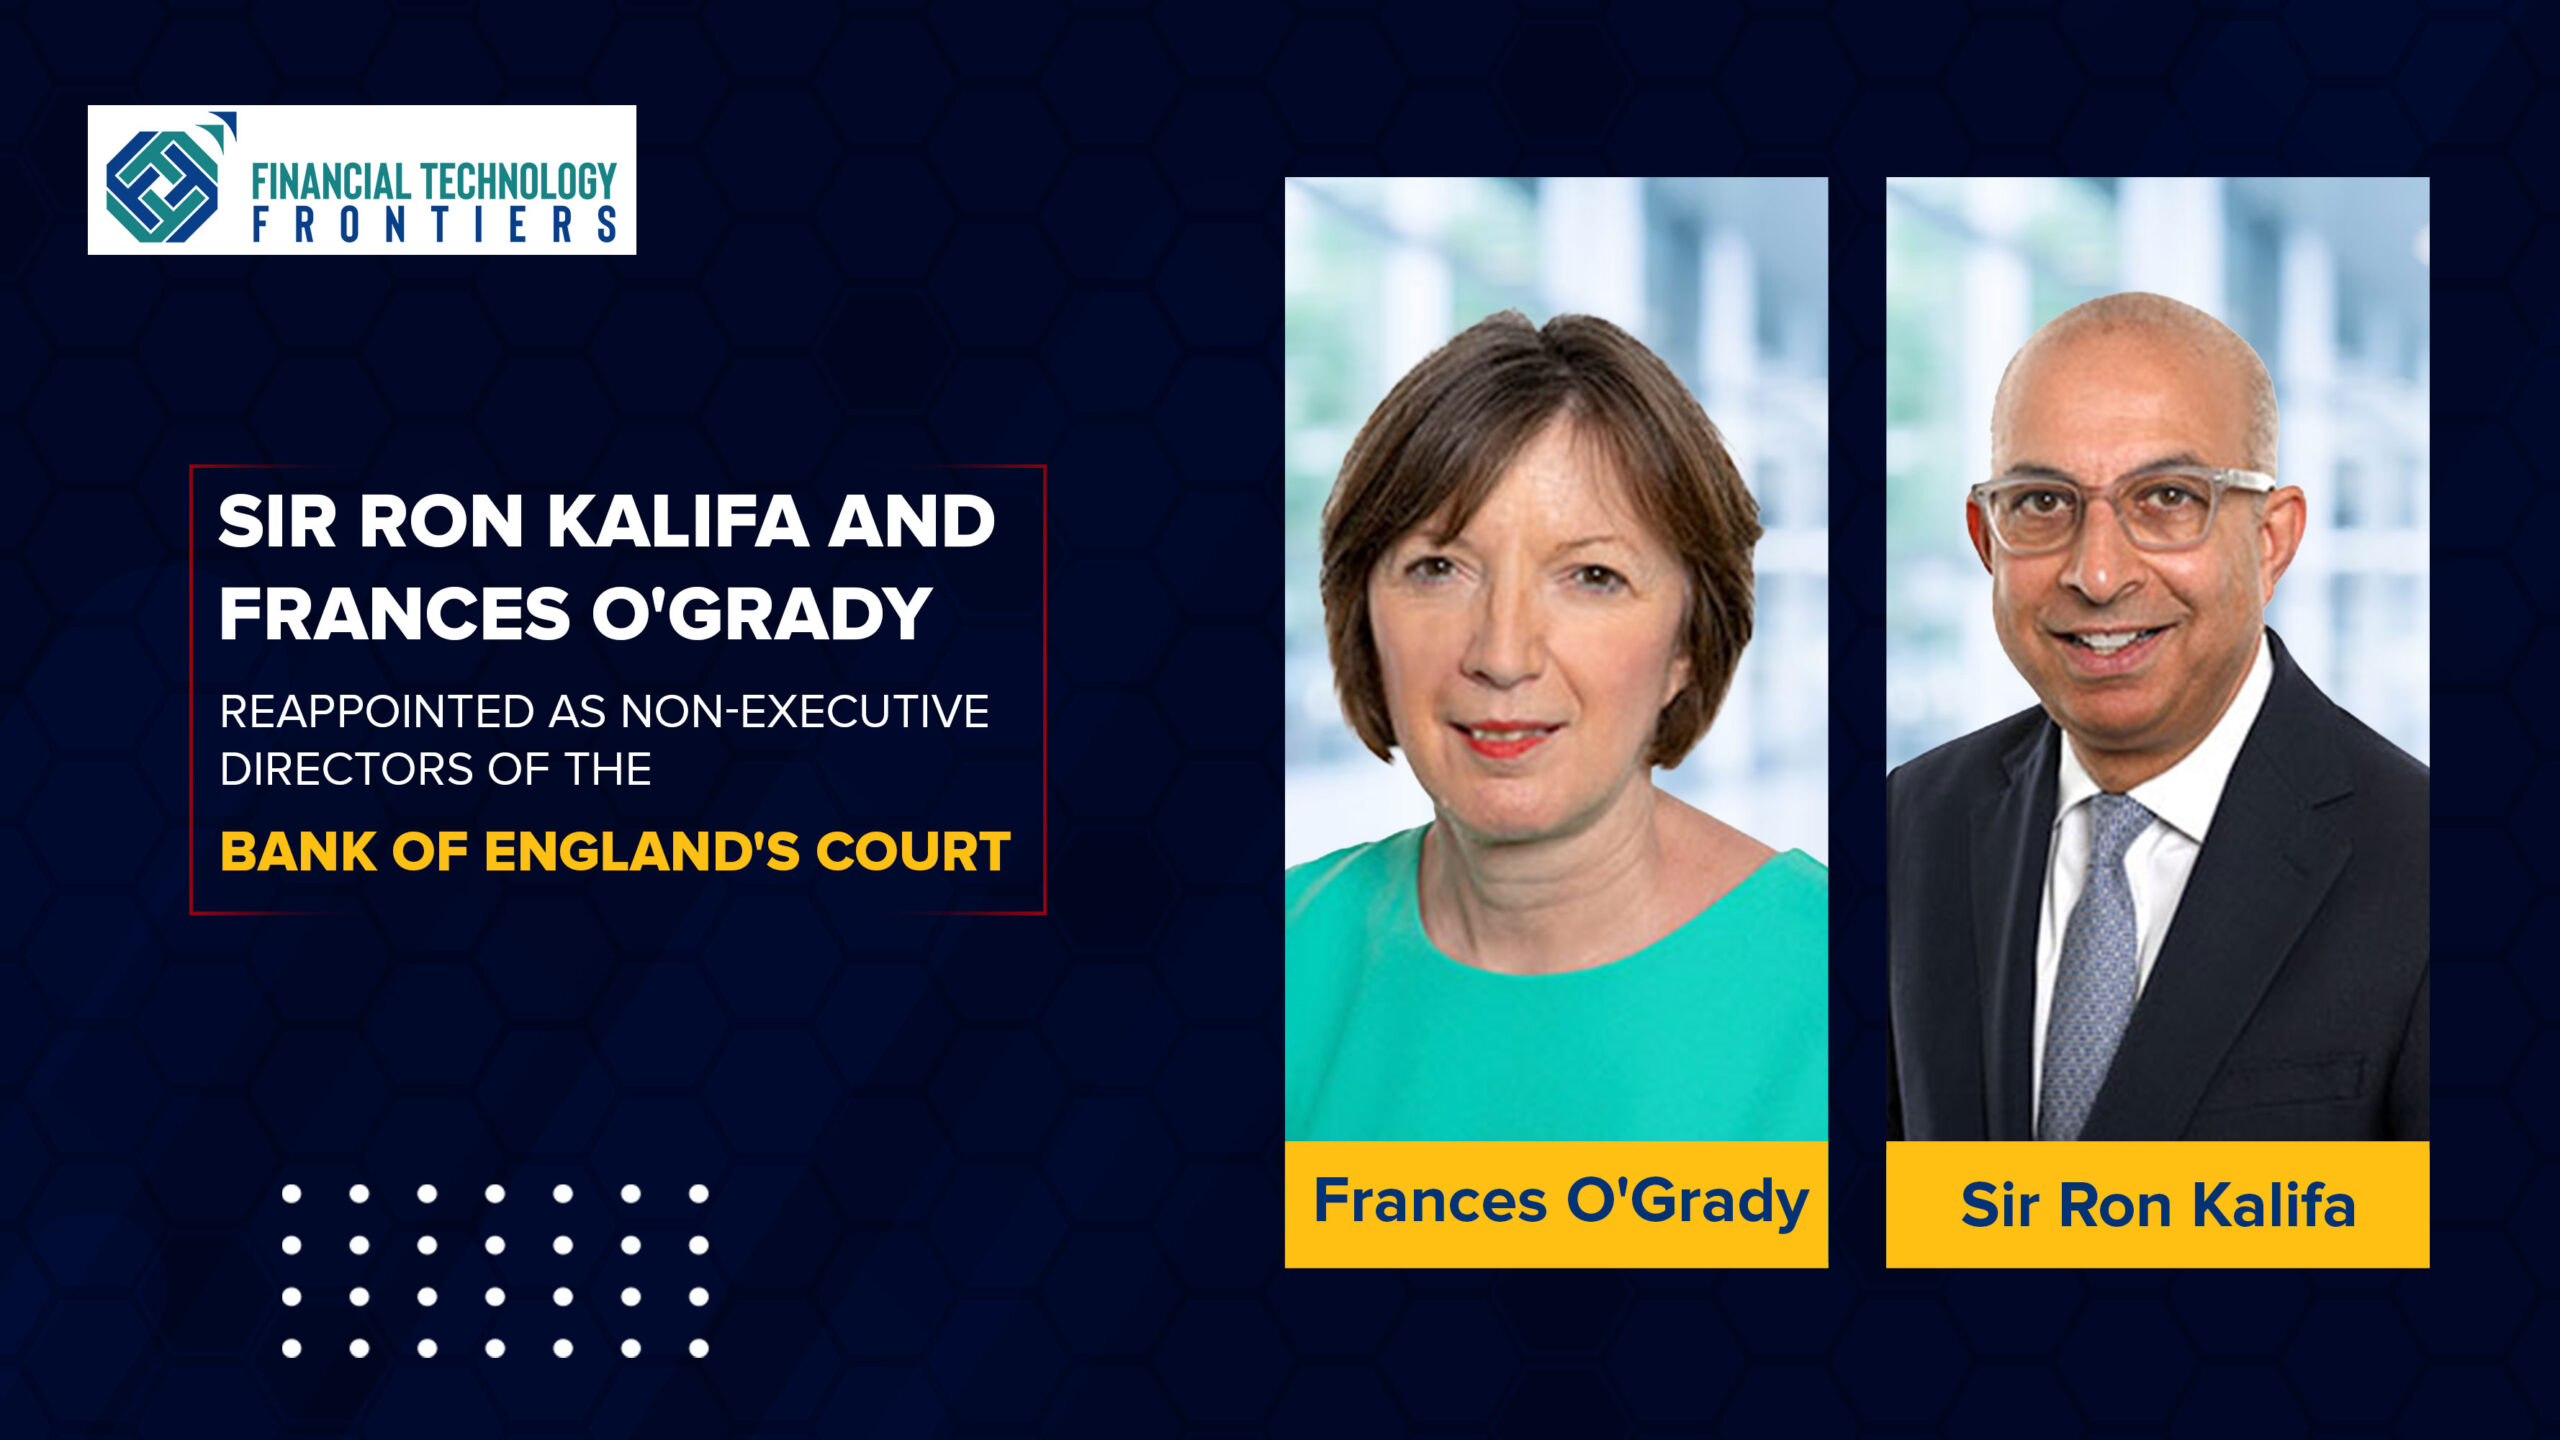 Sir Ron Kalifa and Frances O’Grady reappointed as Non-Executive Directors of the Bank of England’s Court